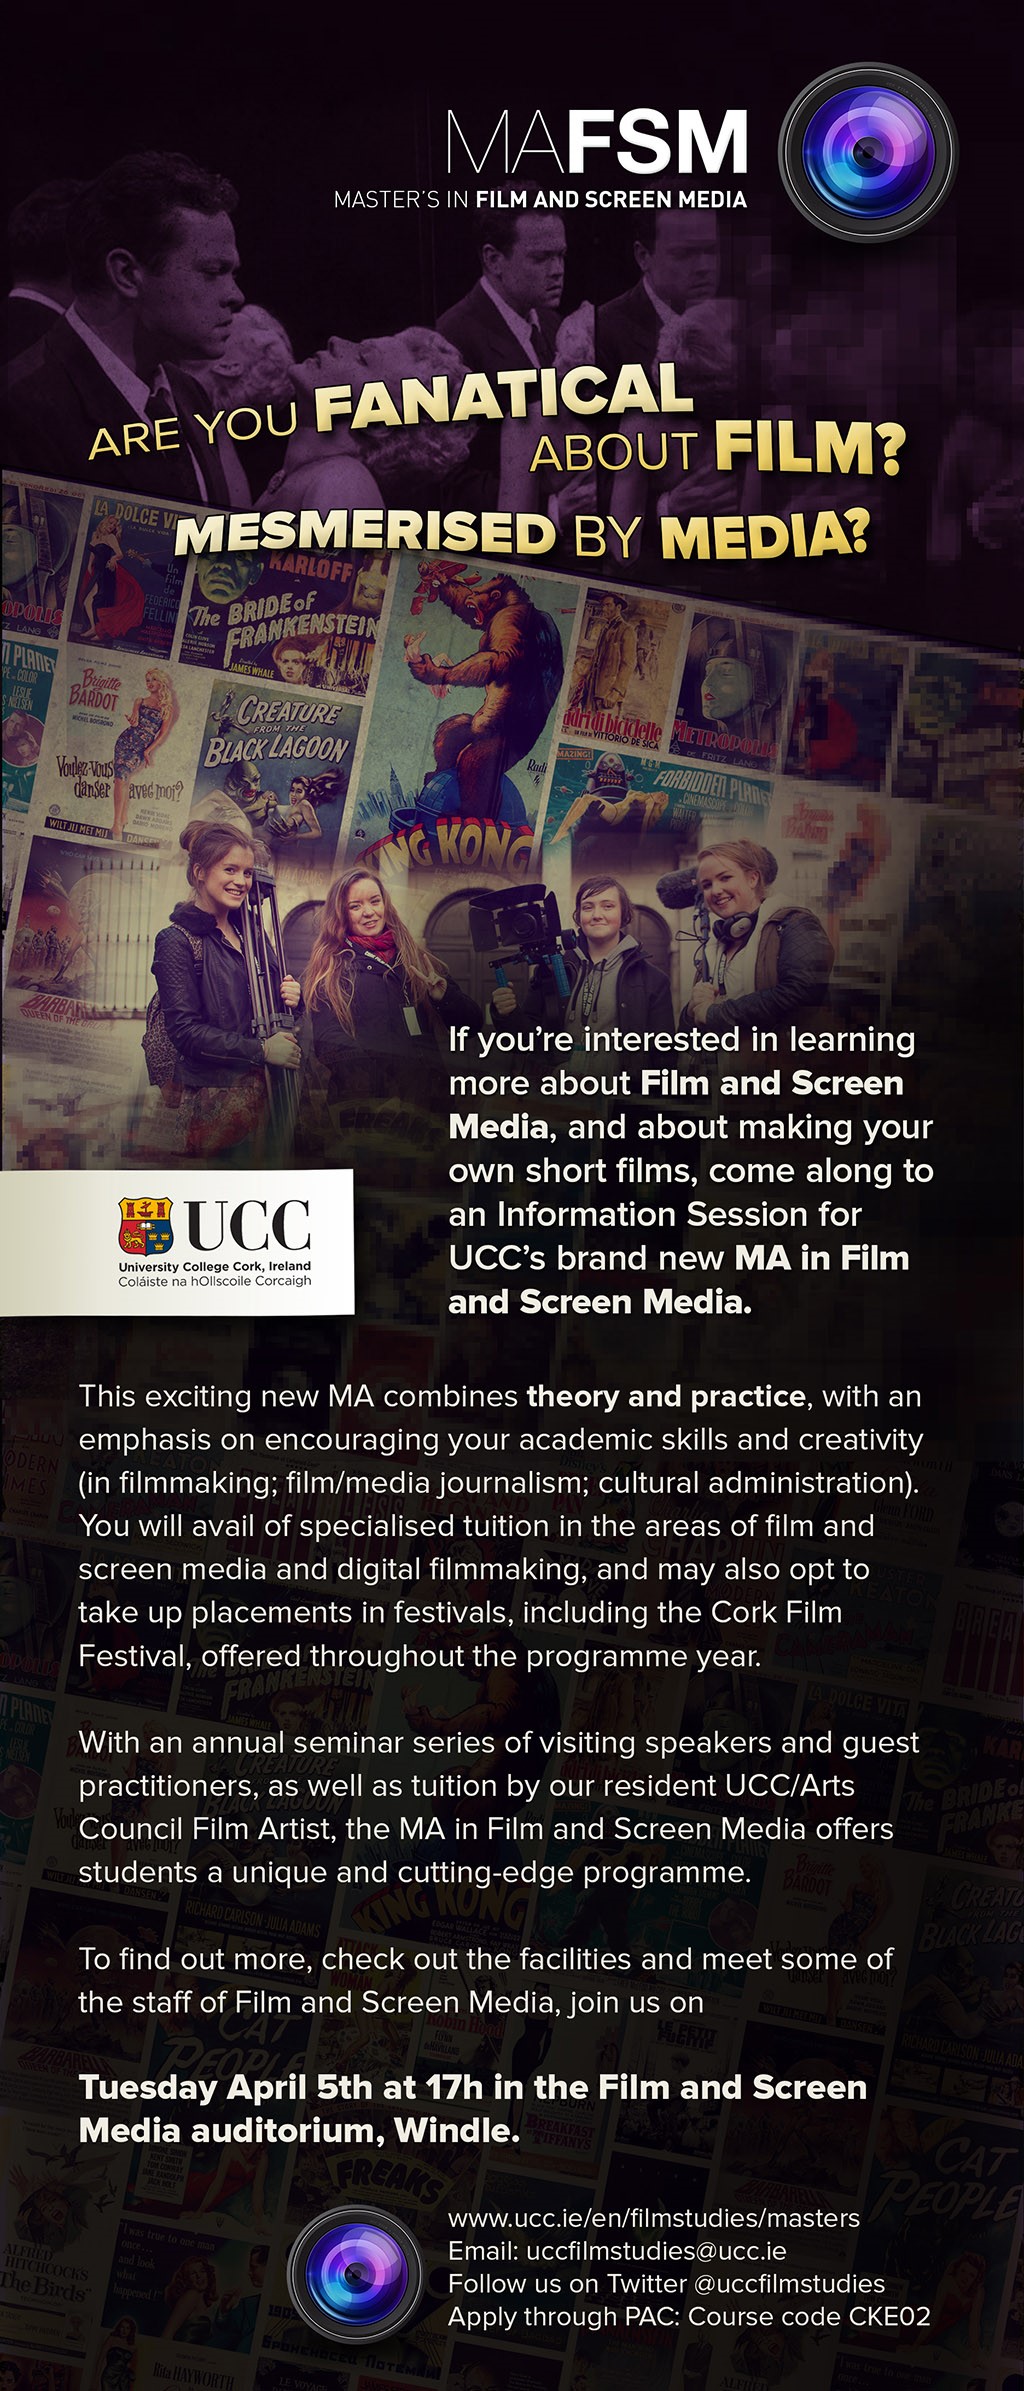 MA in Film and Screen Media Information Session Tuesday 5th April, 5:00pm. Film and Screen Media Auditorium Windle.